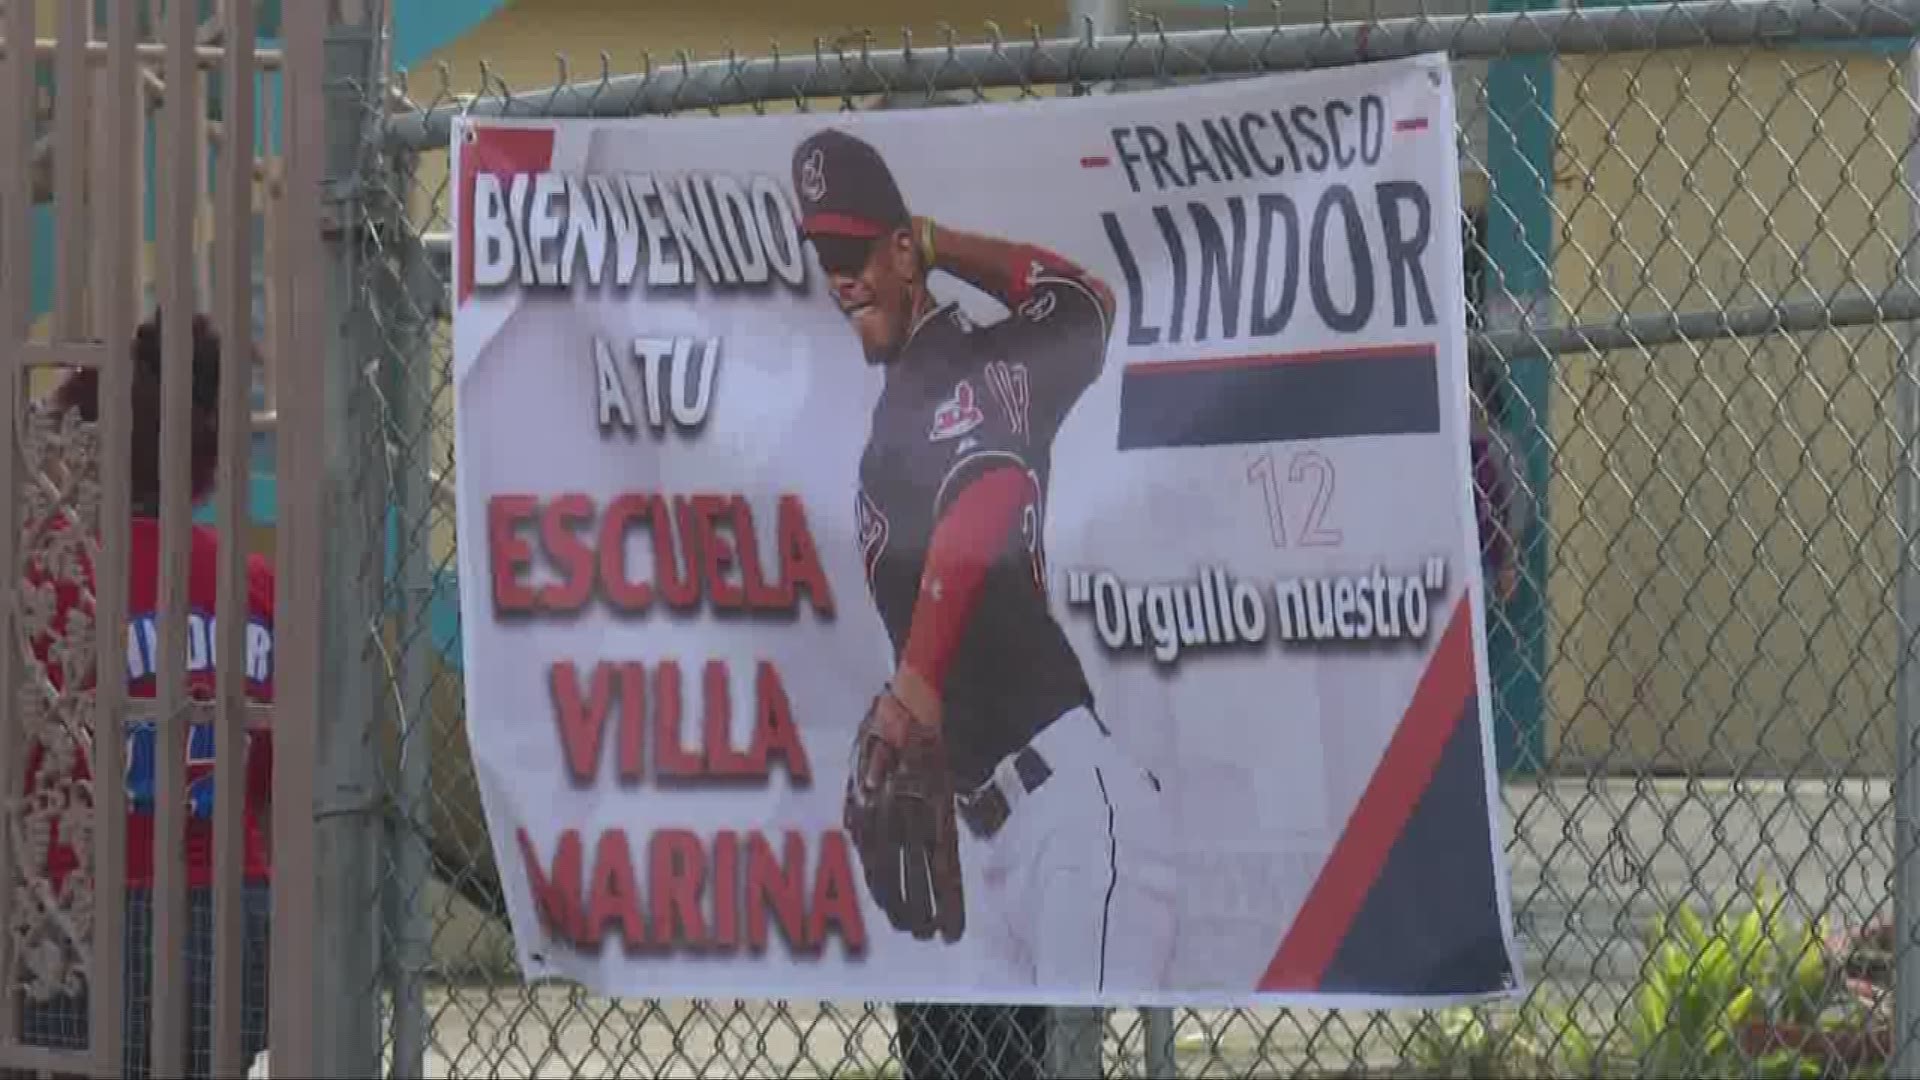 April 17, 2018: WKYC's Brandon Simmons traveled to Puerto Rico to capture all the action.